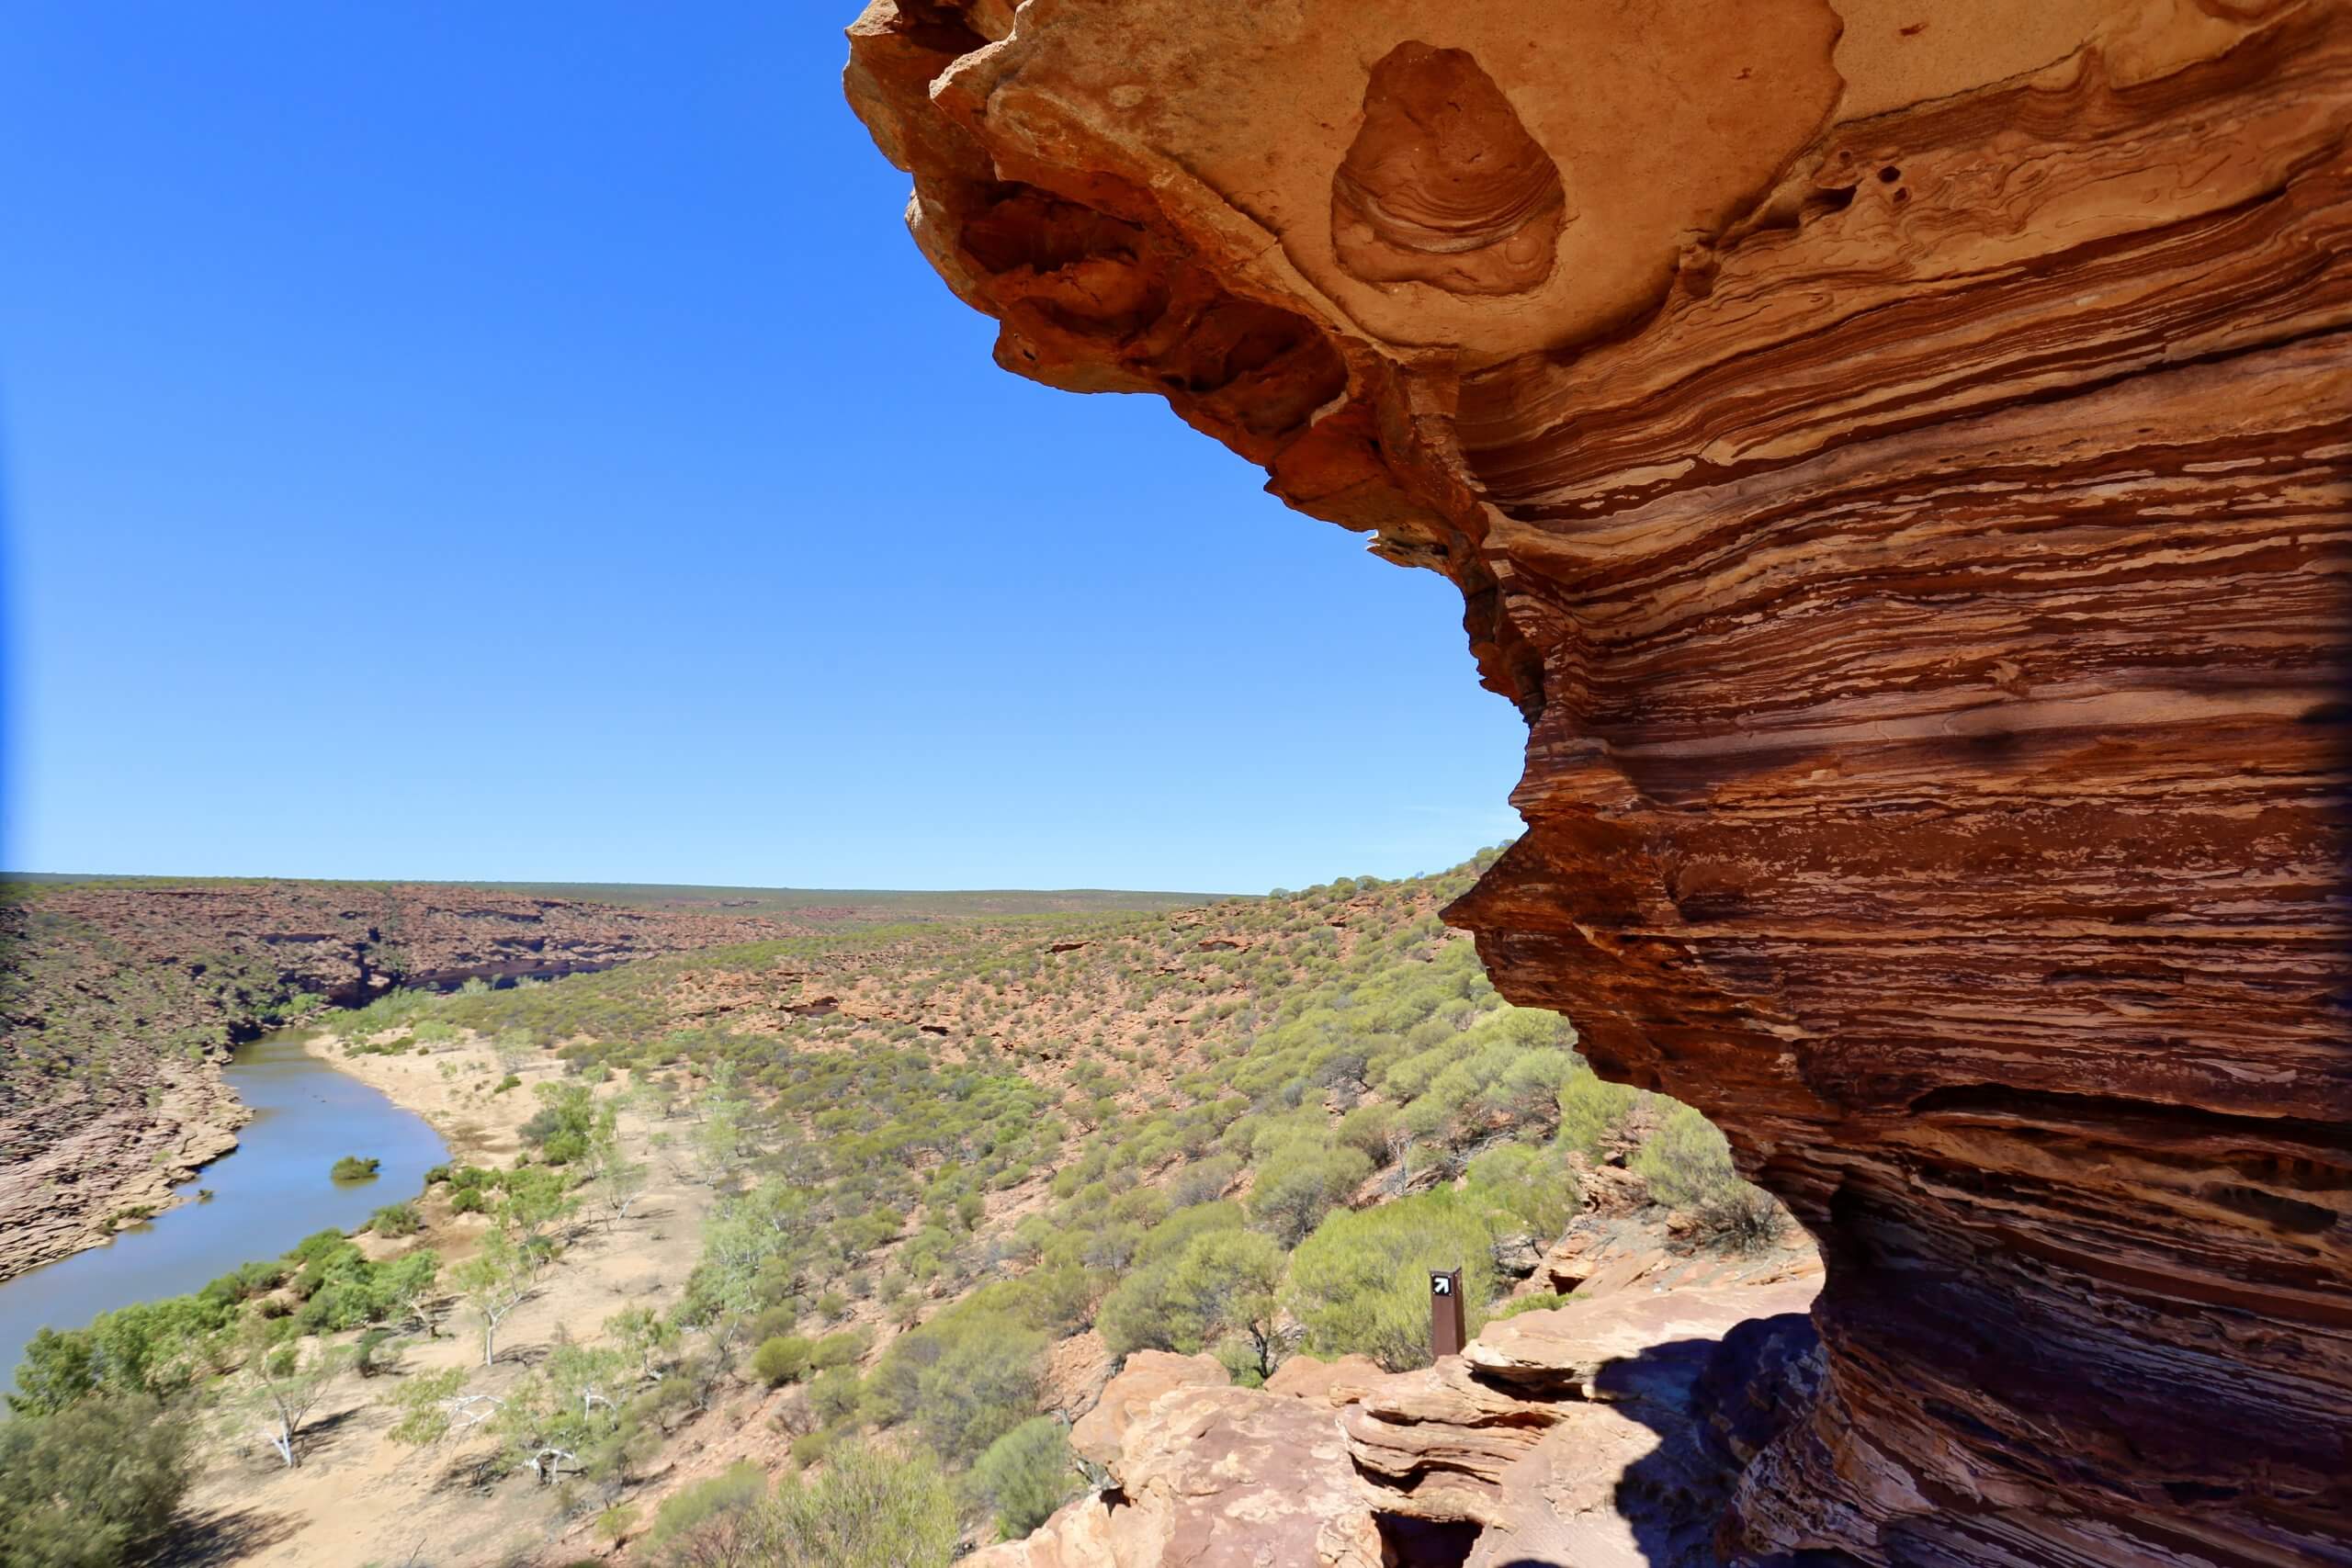 A view from Kalbarri National Park.